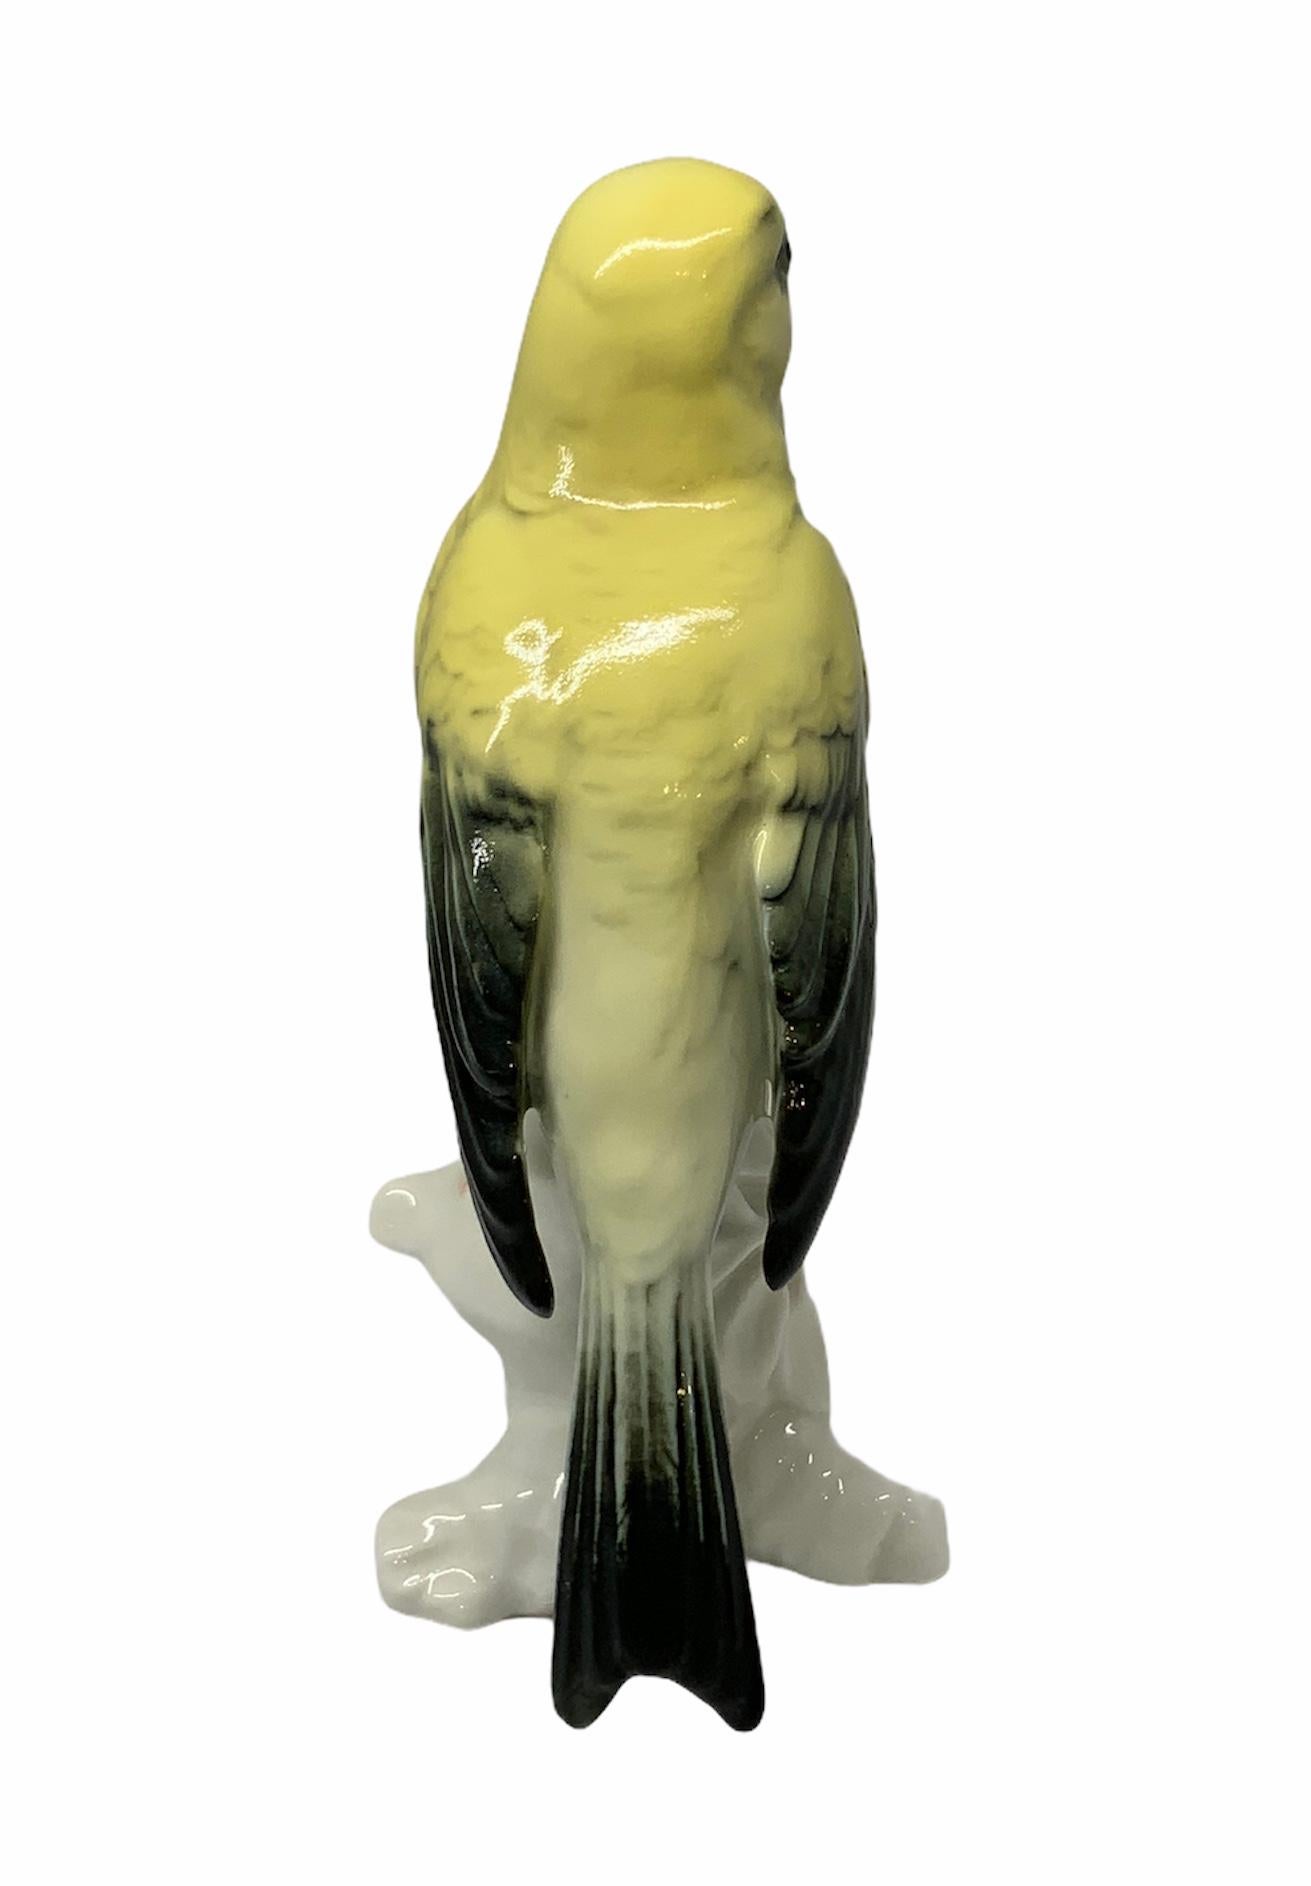 German Porcelain of a Canary Bird Figurine In Good Condition For Sale In Guaynabo, PR